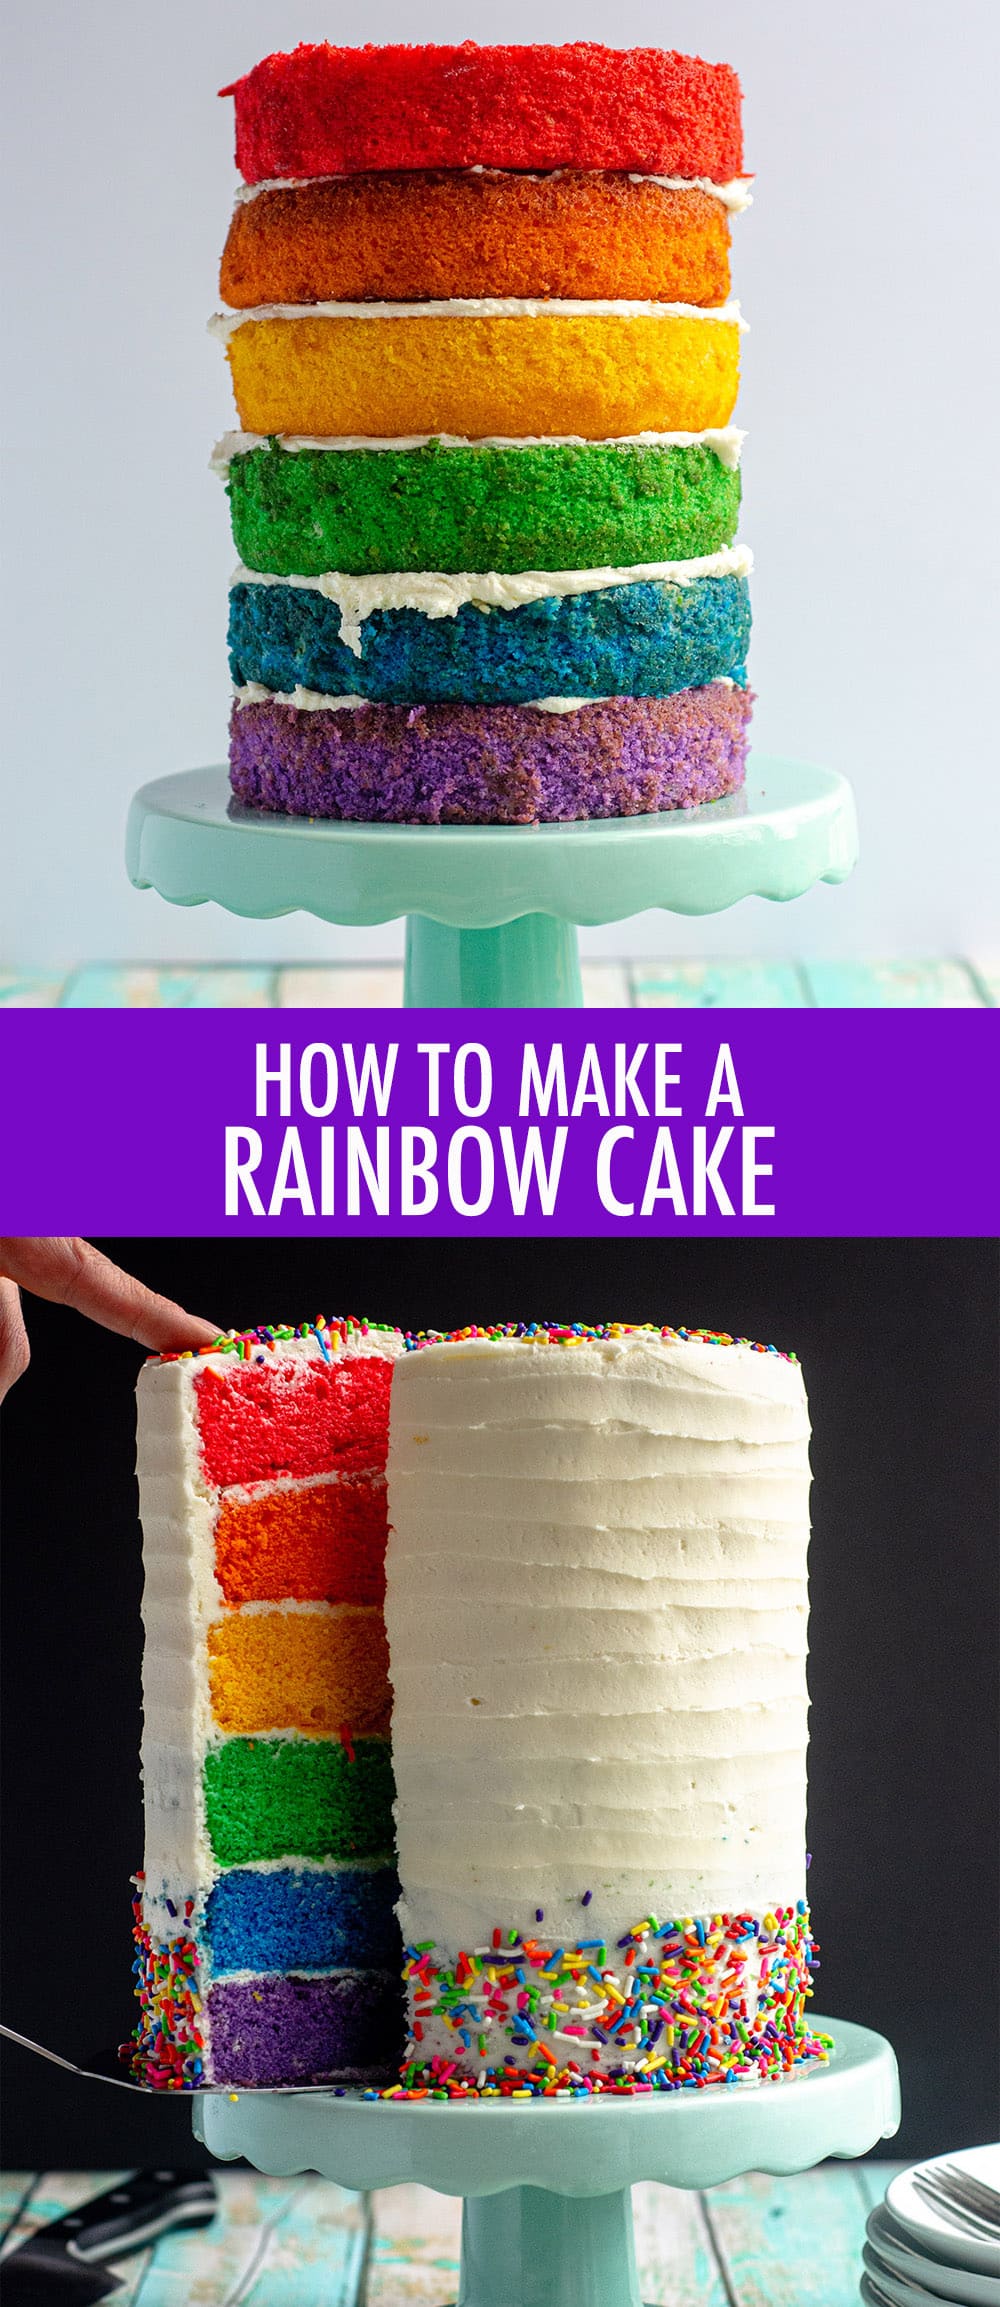 Learn how to make this show-stopping cake AND learn how to scale it to your needs. It's easier than you think but makes an incredible conversation piece! via @frshaprilflours